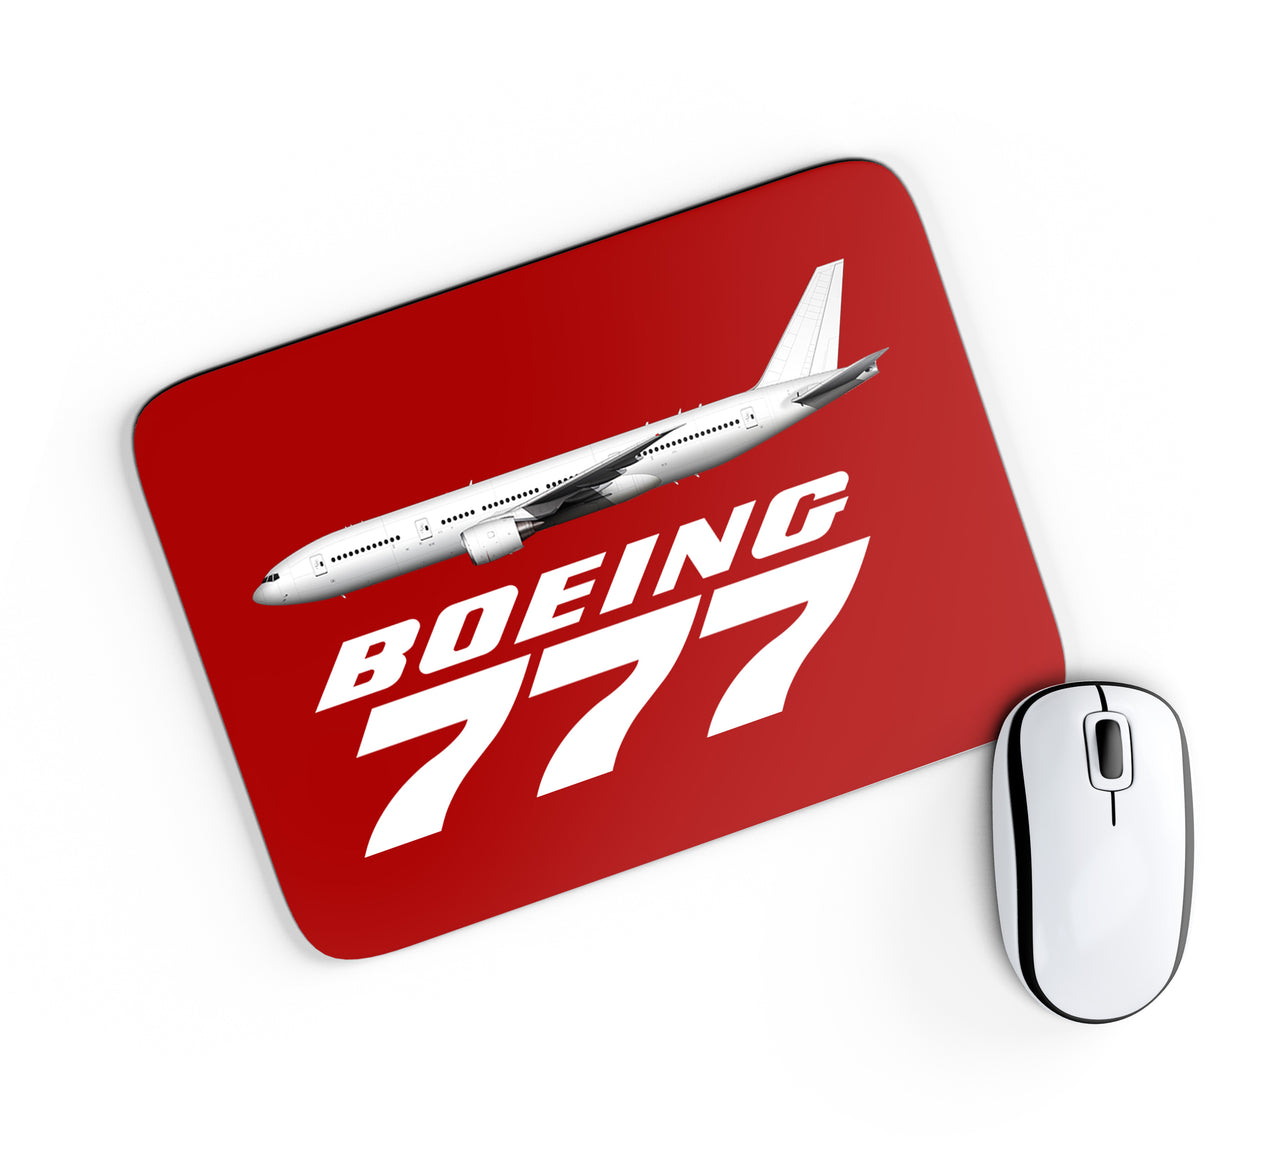 The Boeing 777 Designed Mouse Pads